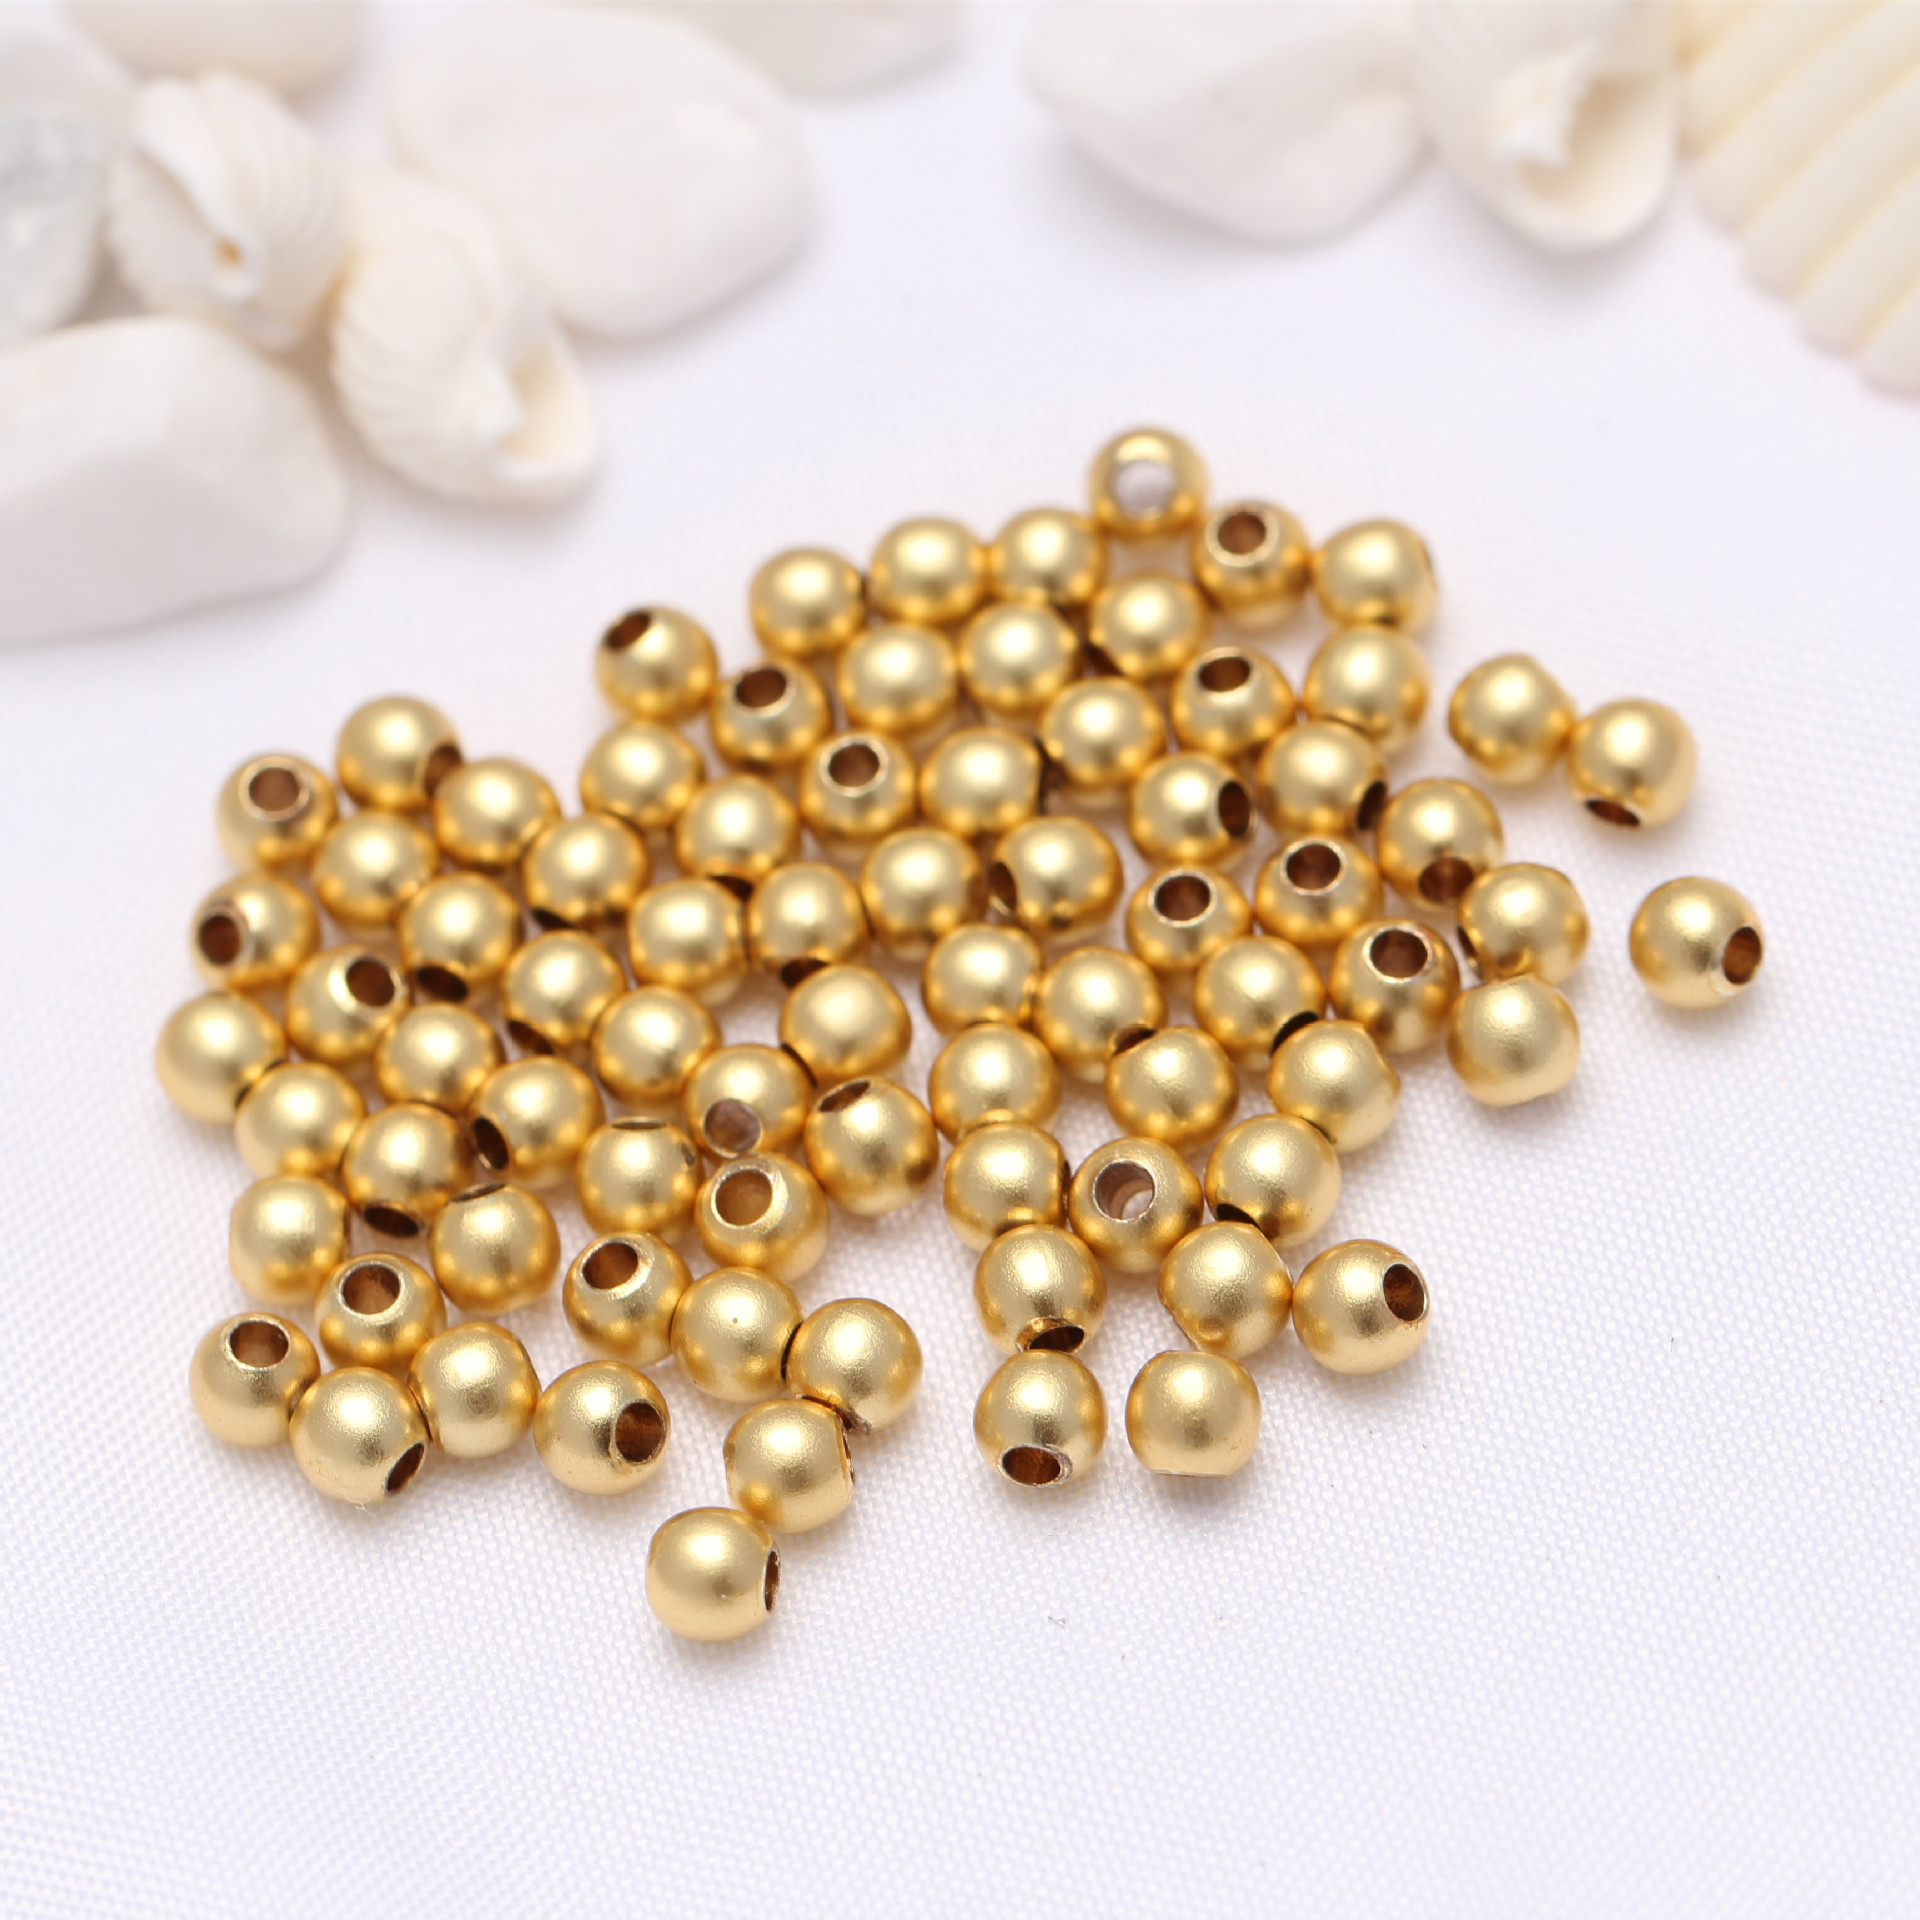 A-82 Color Preserving Sand Gold Loose Bead 3.0mm